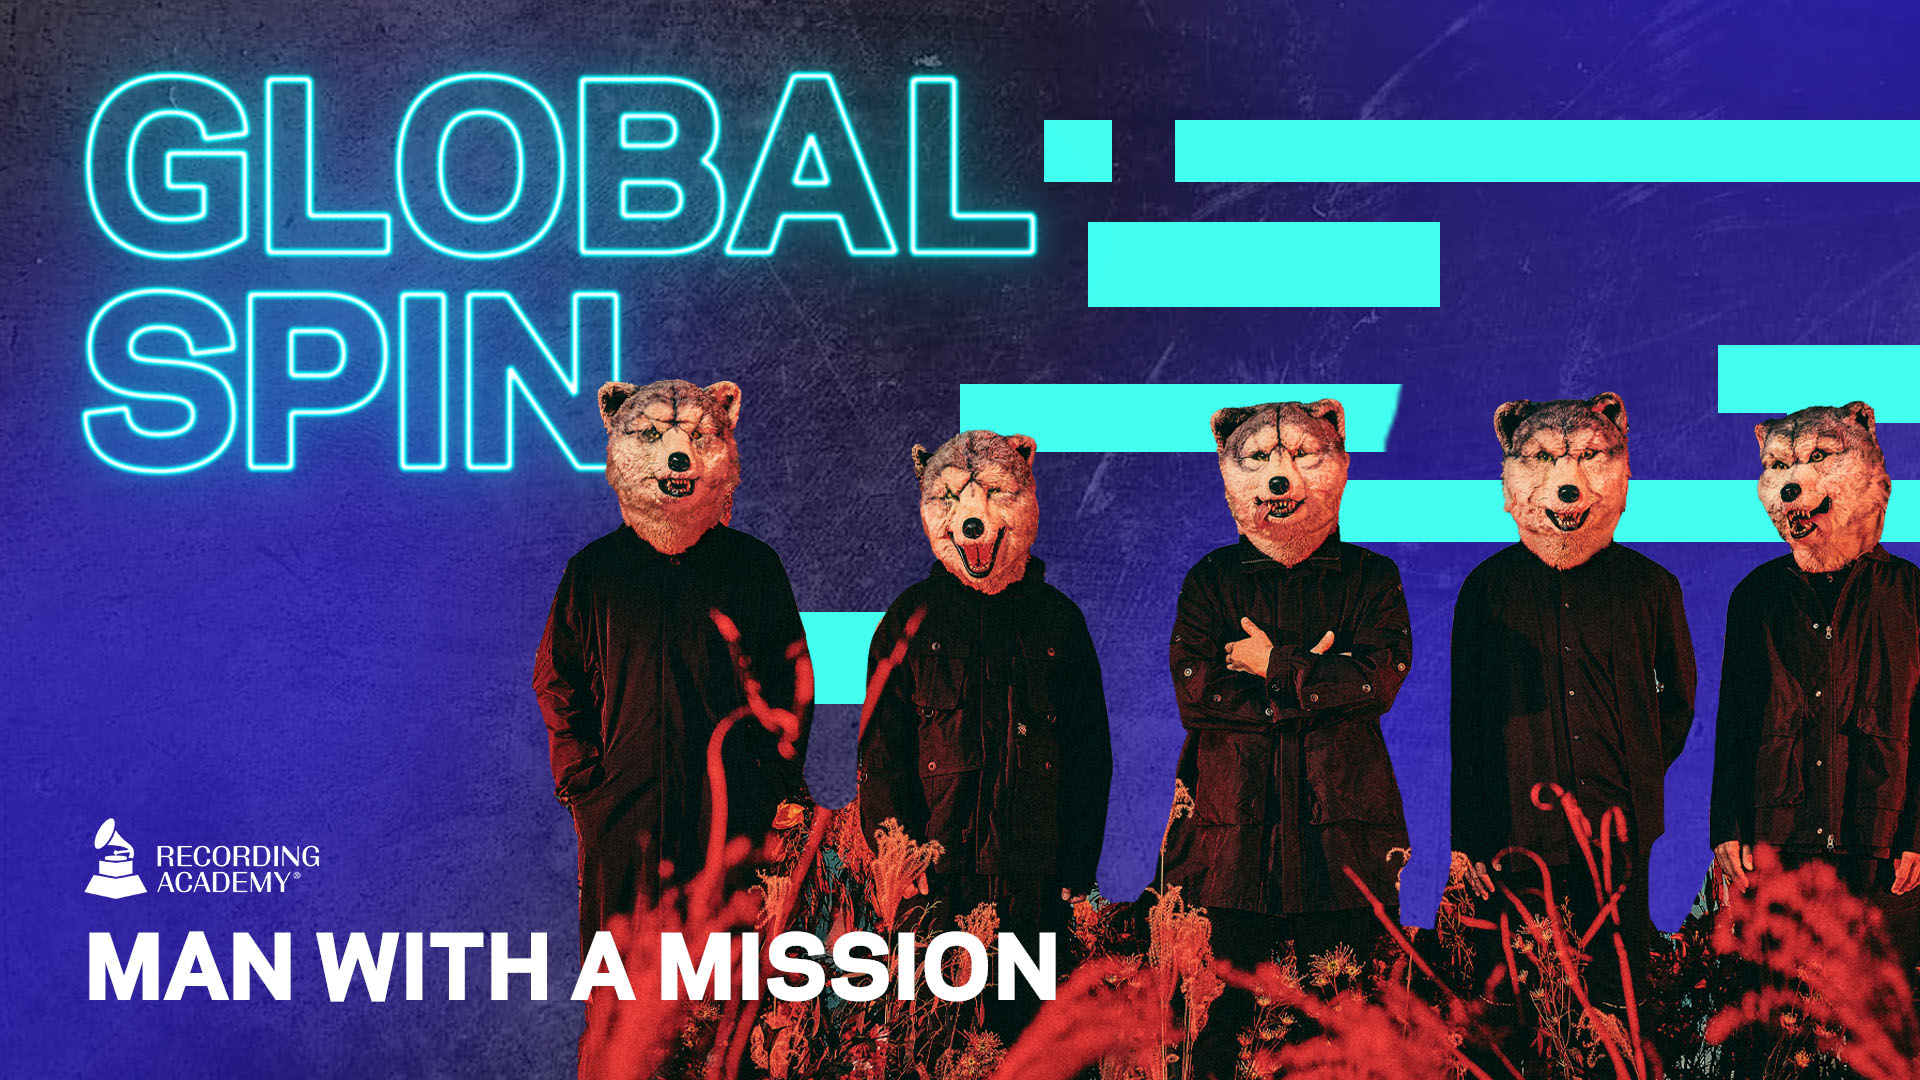 Watch Man With A Mission Perform "Fly Again"